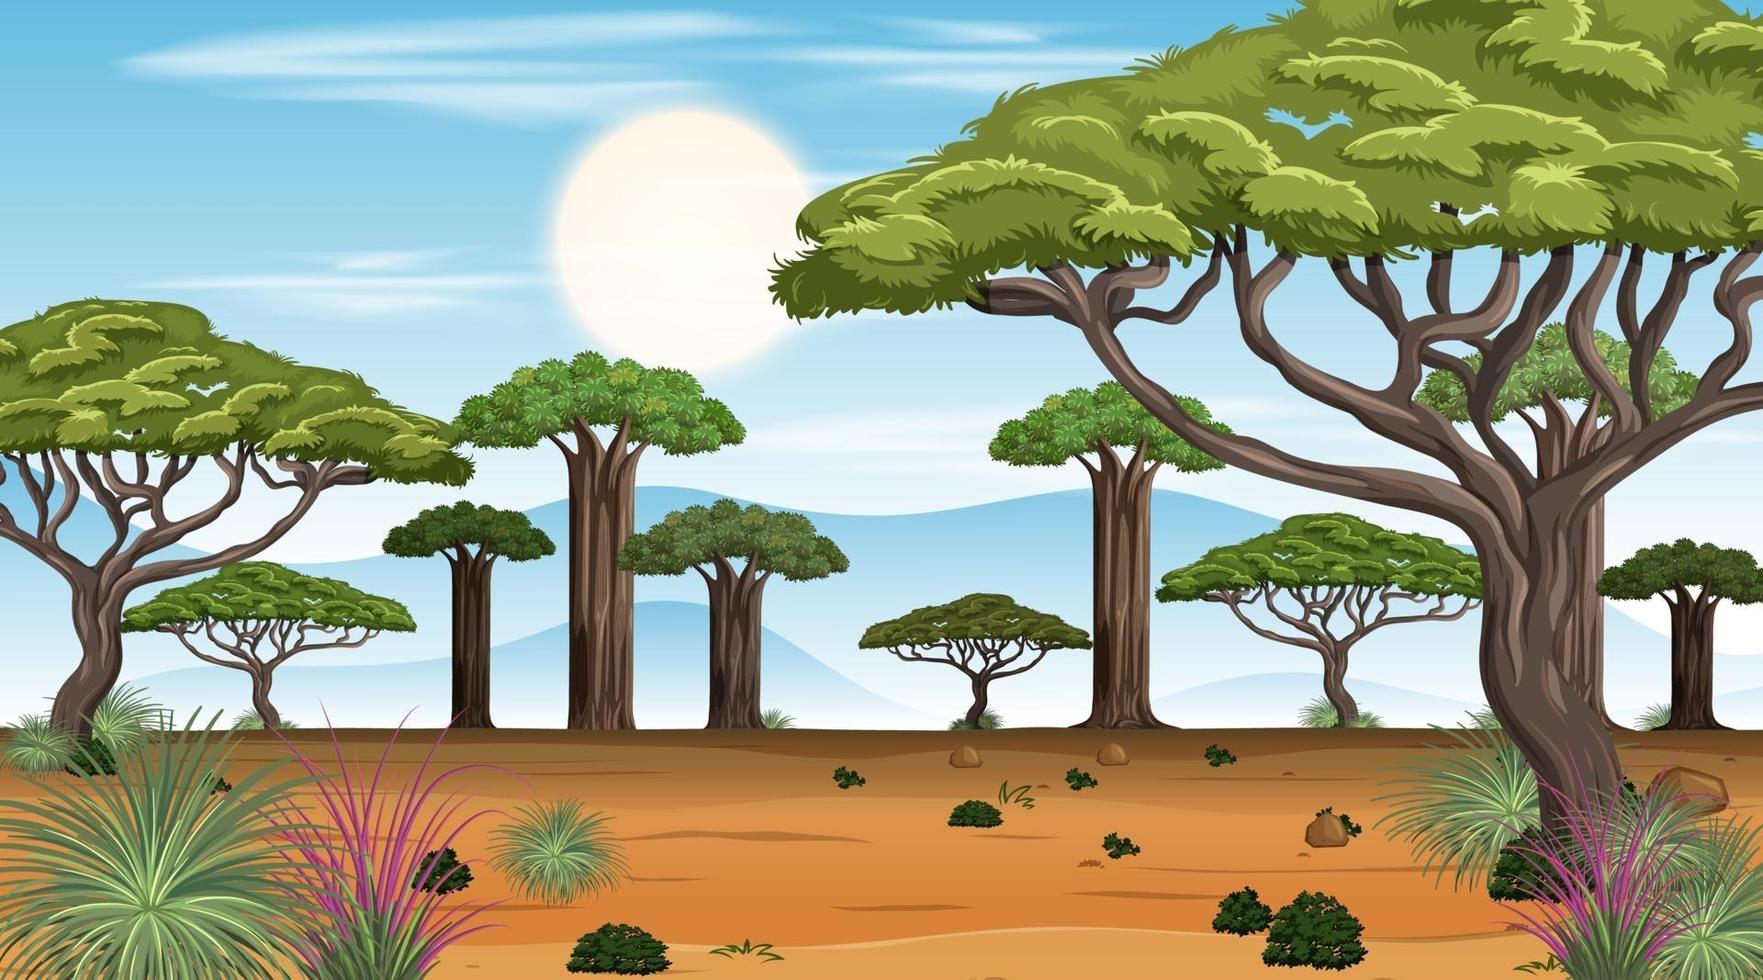 African Savanna forest landscape scene at day time vector